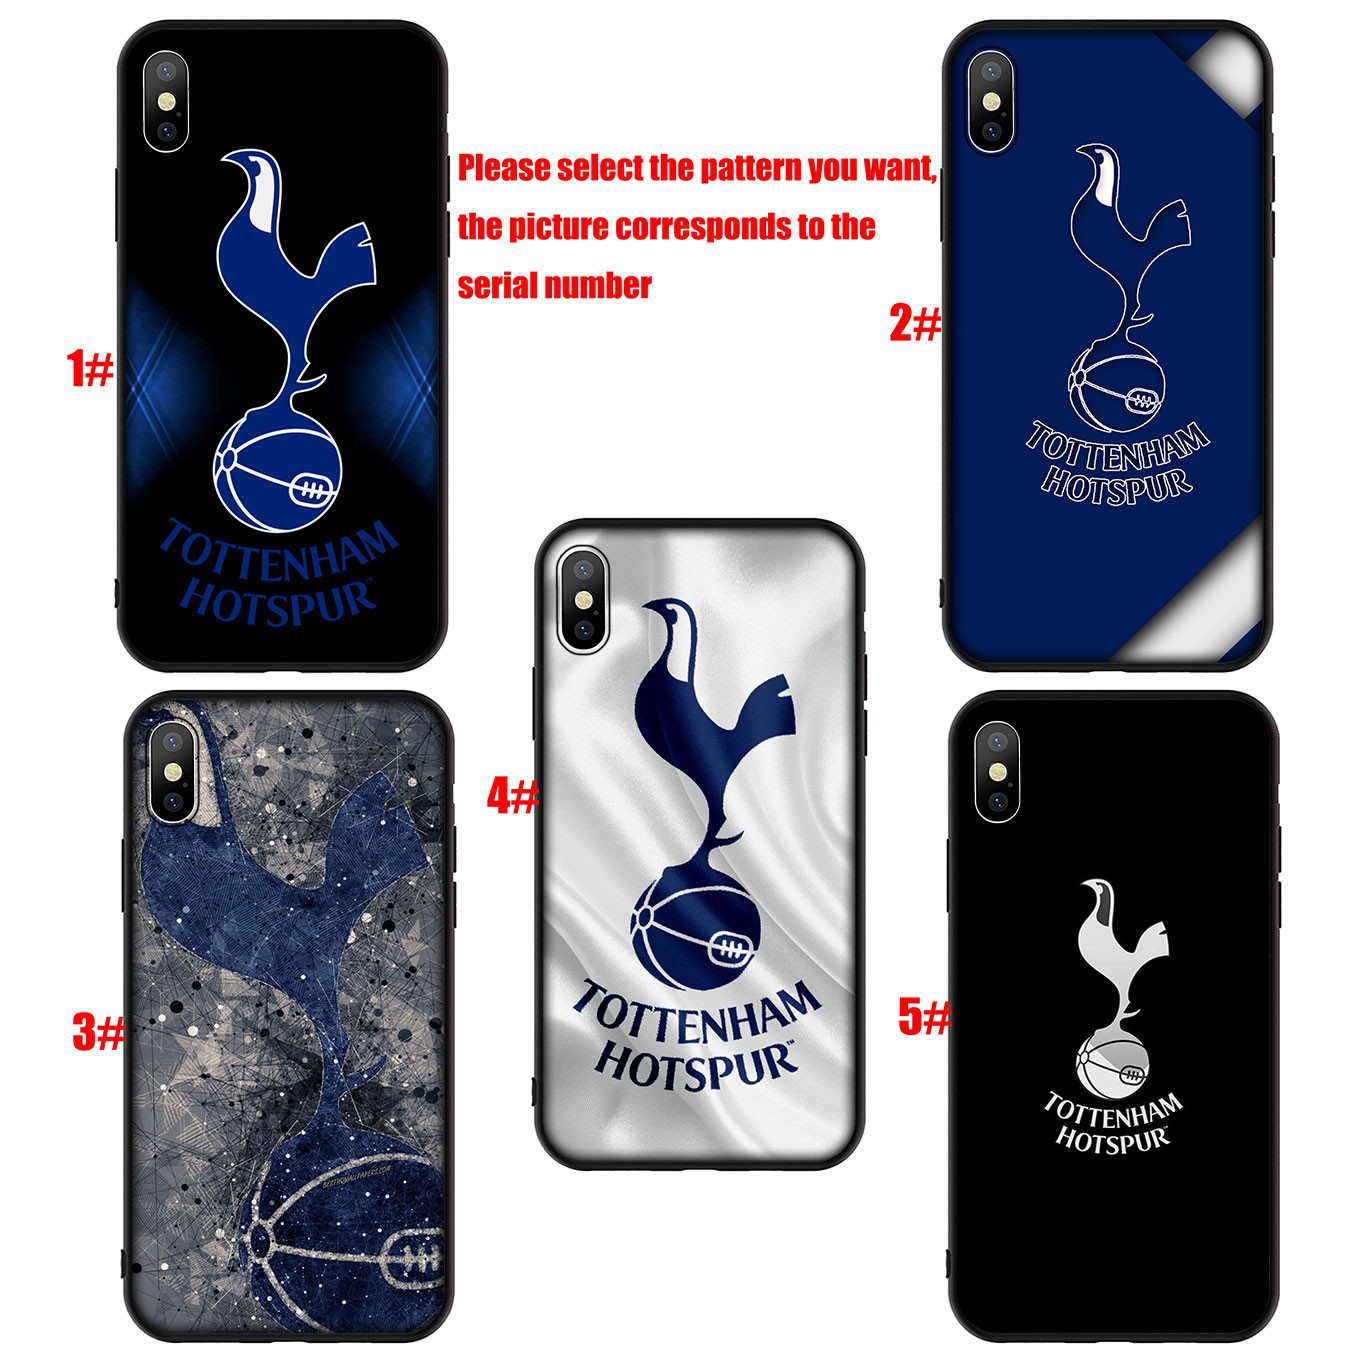 Samsung Galaxy Note 20 Ultra Note 10 Plus  Lite 8 9 S7 Edge M11 Casing Soft Silicone Phone Case Tottenham Hotspur Football Cover